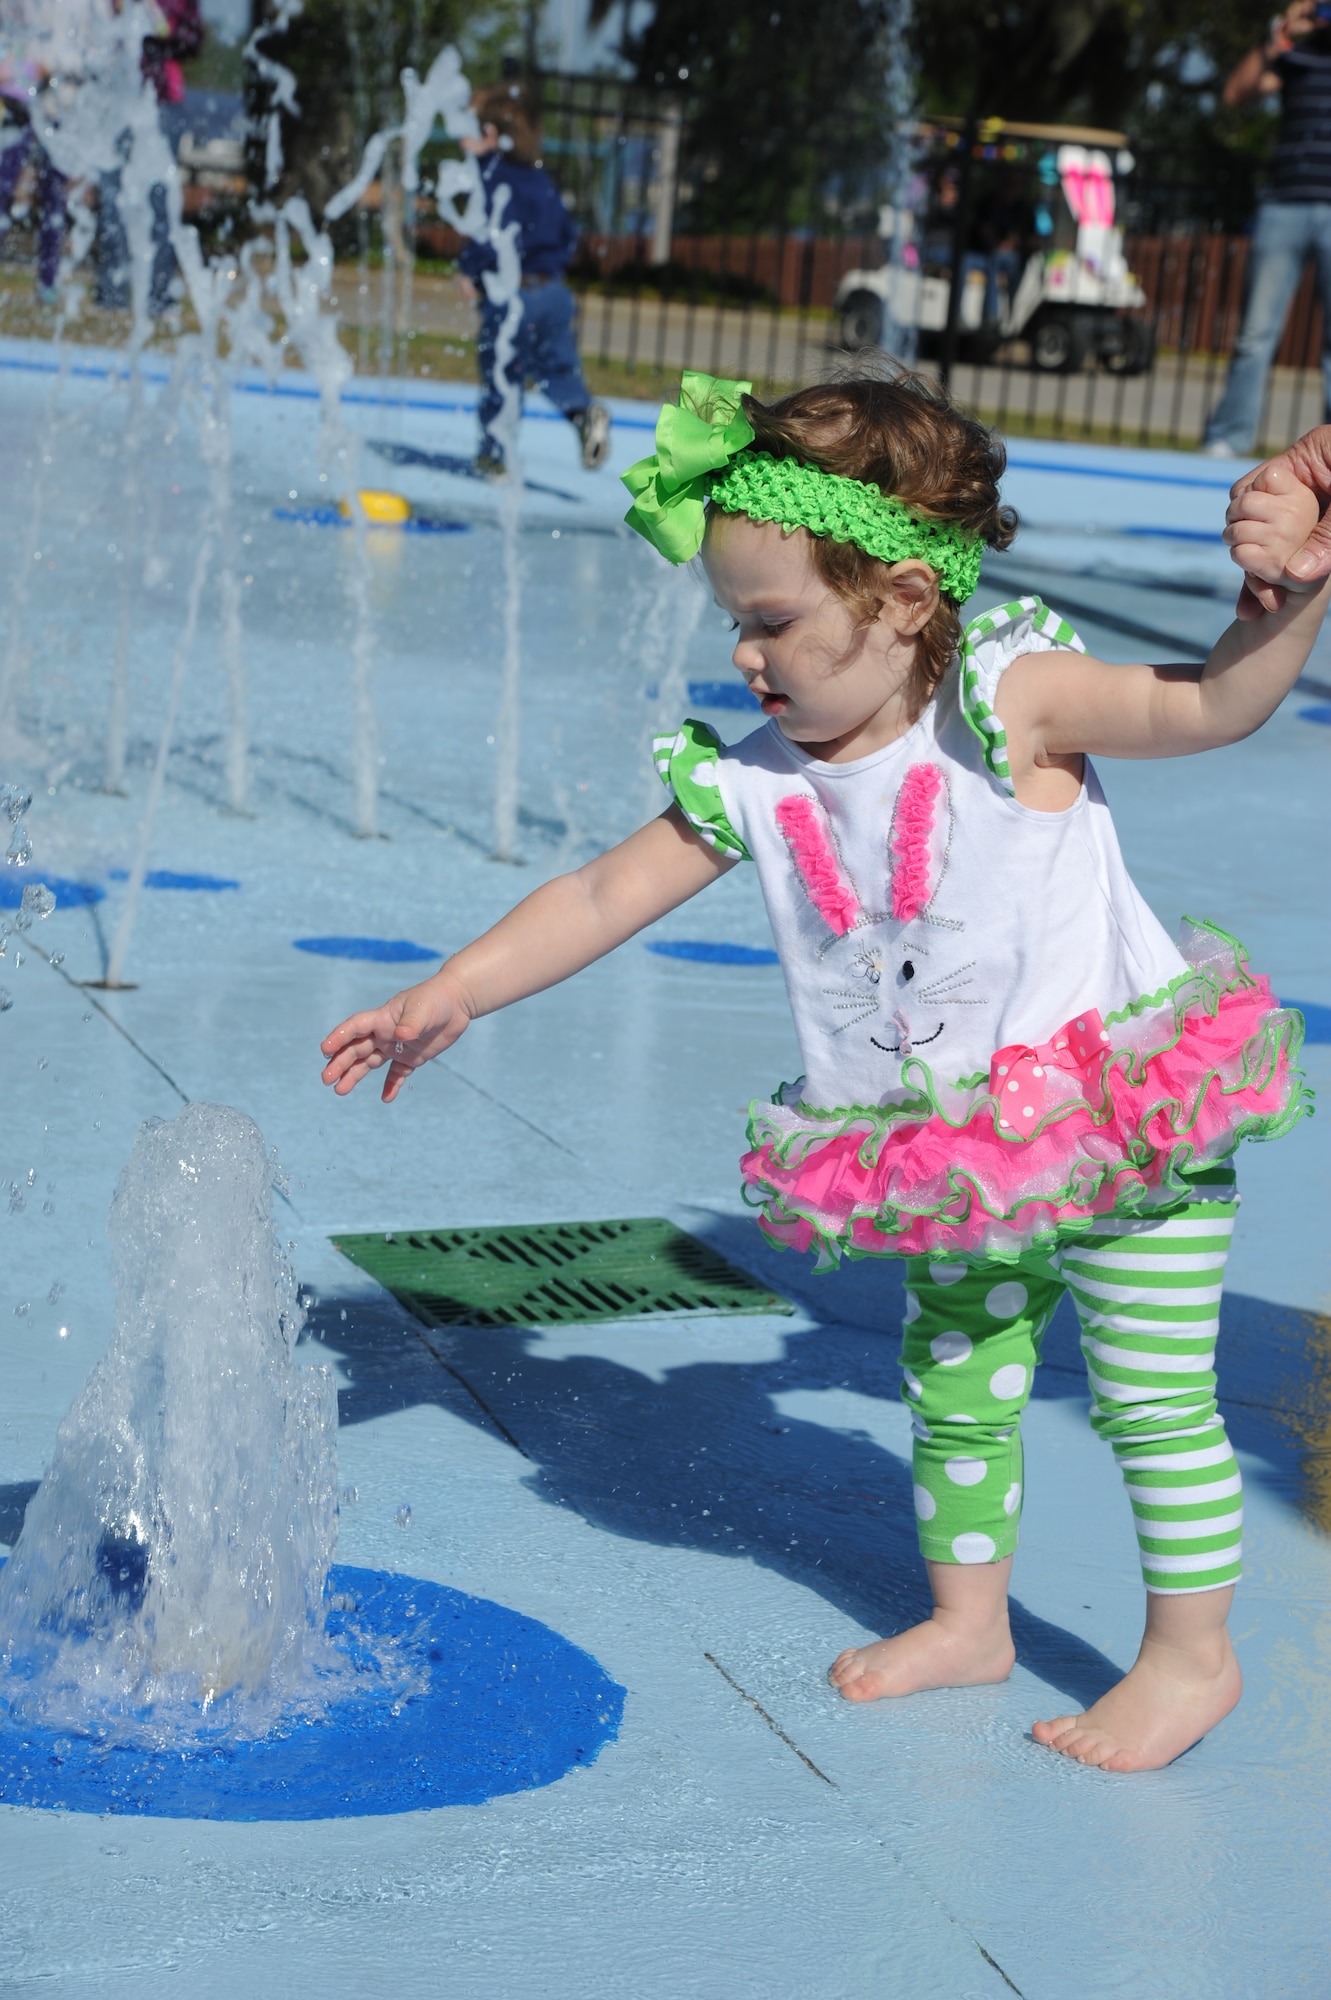 The great-granddaughter of retired Senior Master Sgt. Bob Ochoa plays with the water during the Keesler Outdoor Recreation’s Splash Pad grand opening at the marina April 19, 2014, at Keesler Air Force Base, Miss.  The splash pad was funded with a portion of the 2013 Commander-in-Chief Installation Excellence award funds.  (U.S. Air Force photo by Kemberly Groue)